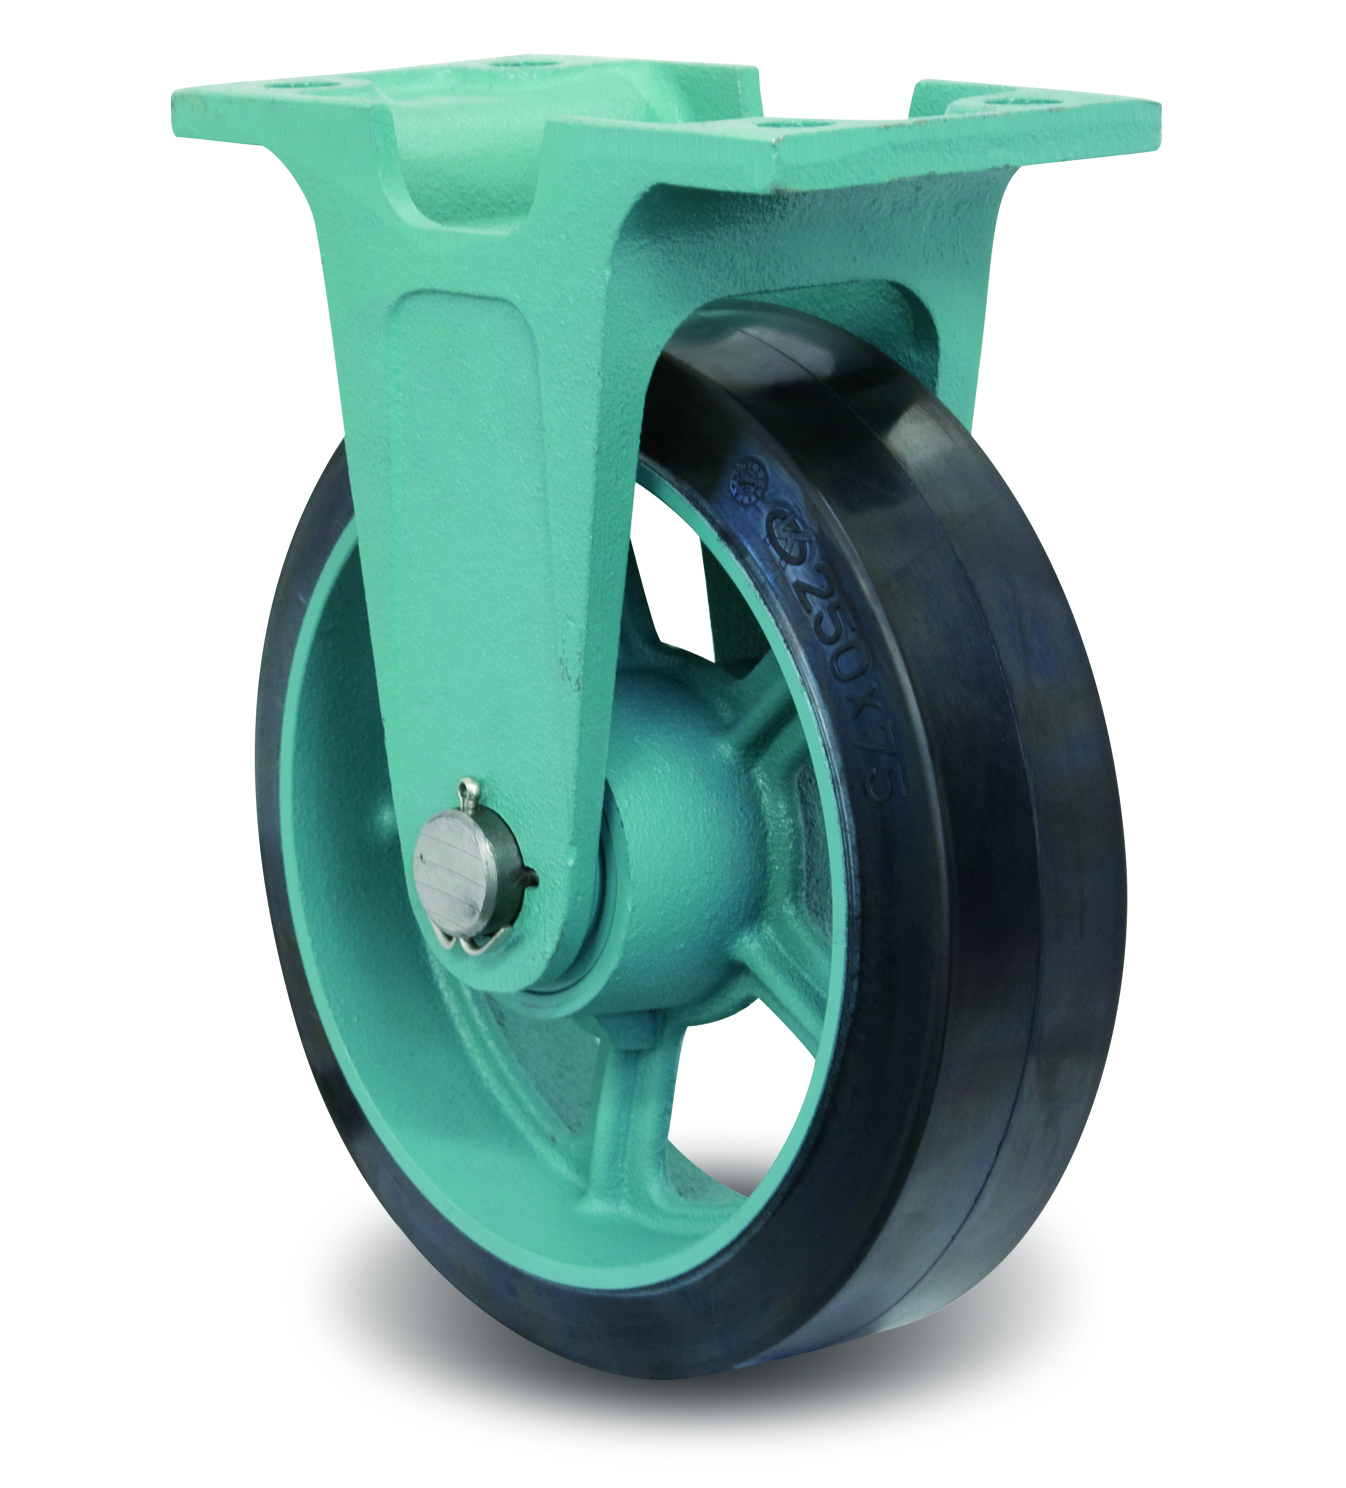 Ductile Caster Wide Type, Fixed MG-W Metal Fittings, E-MG-W EMG-W250X65